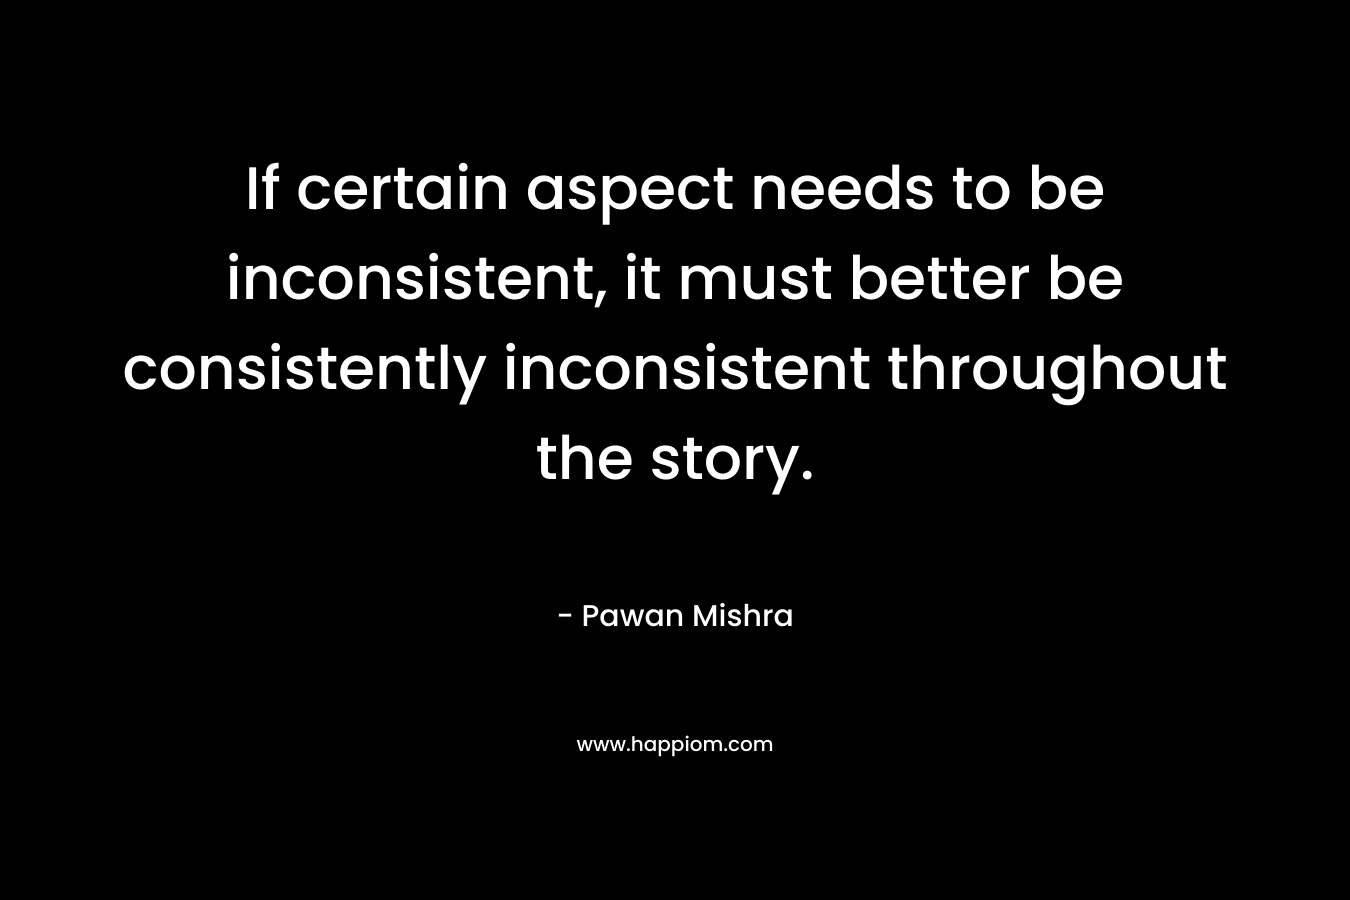 If certain aspect needs to be inconsistent, it must better be consistently inconsistent throughout the story. – Pawan Mishra